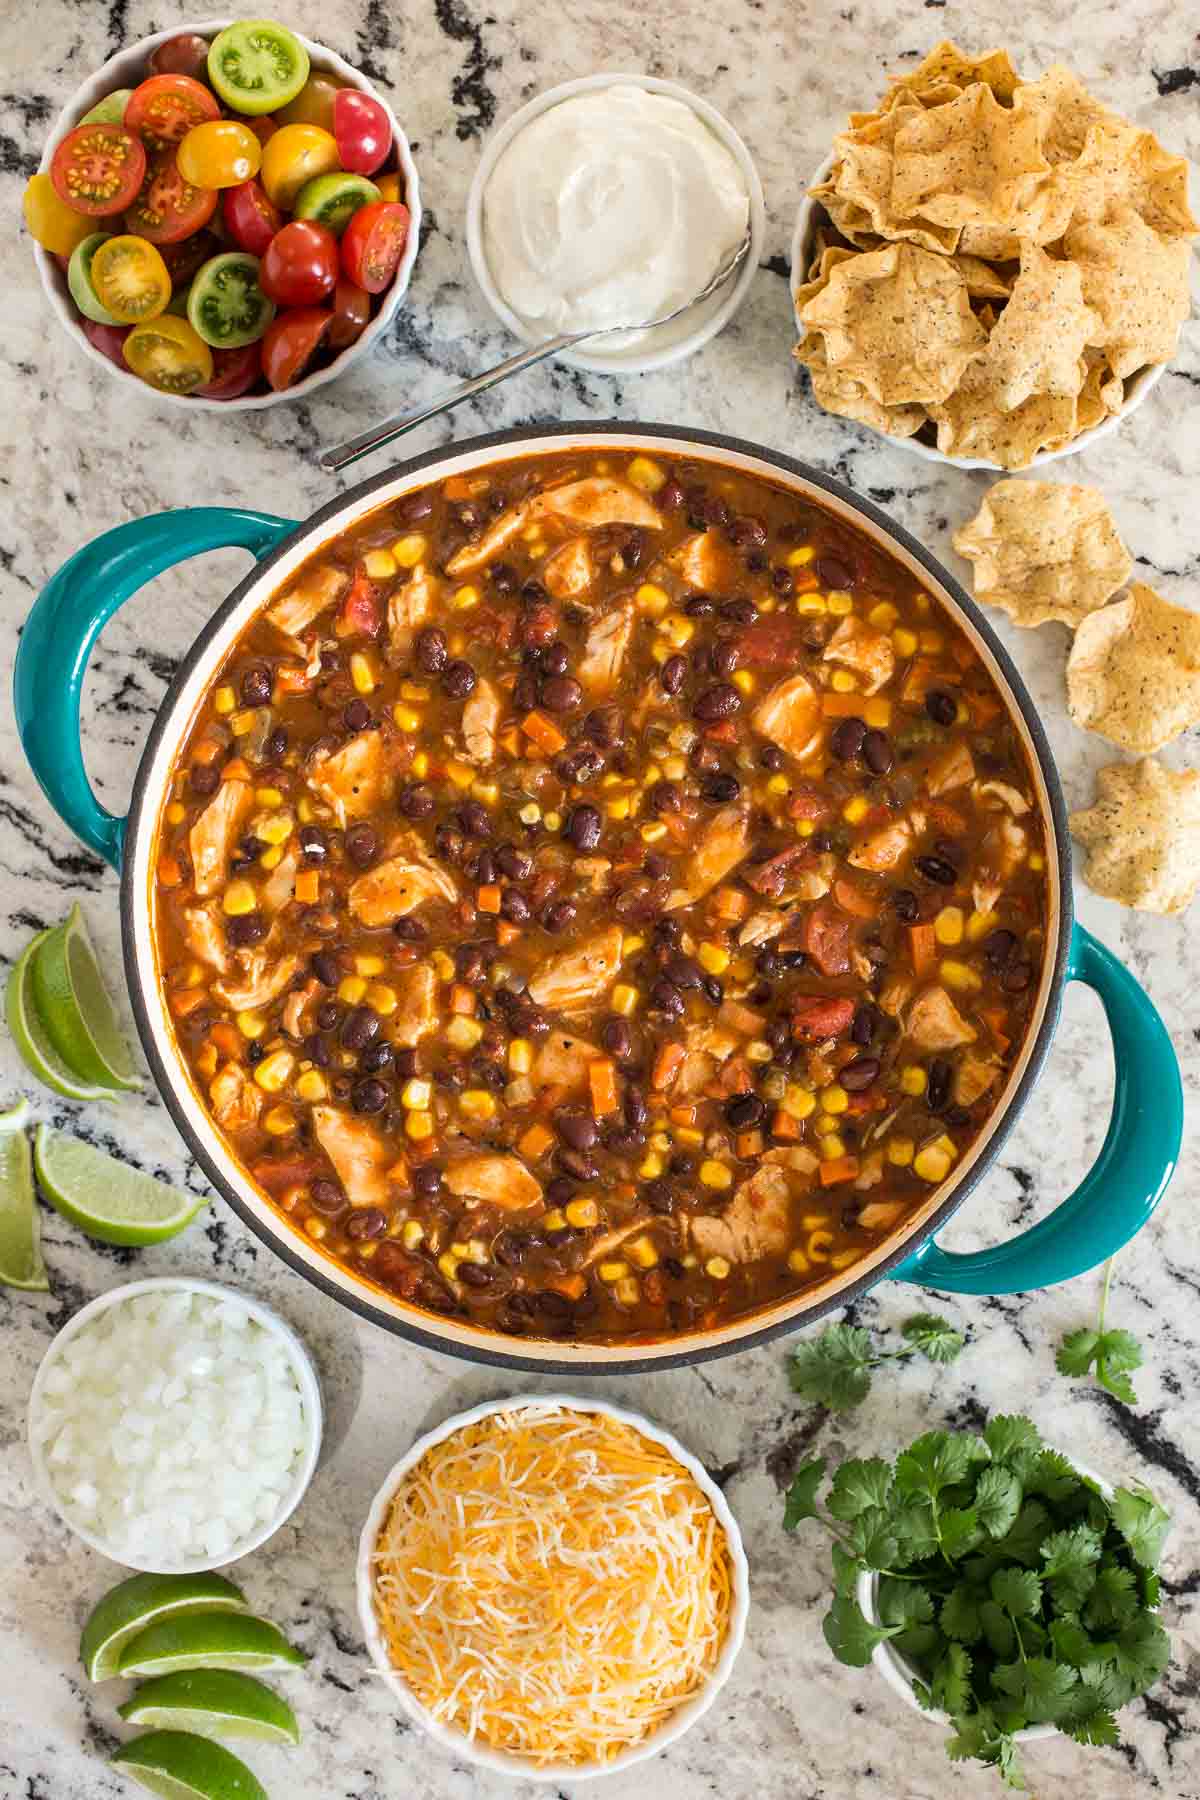 Overhead vertical photo of Chicken Black Bean Chili in a turquoise dutch oven surrounded by small bowls of toppings.